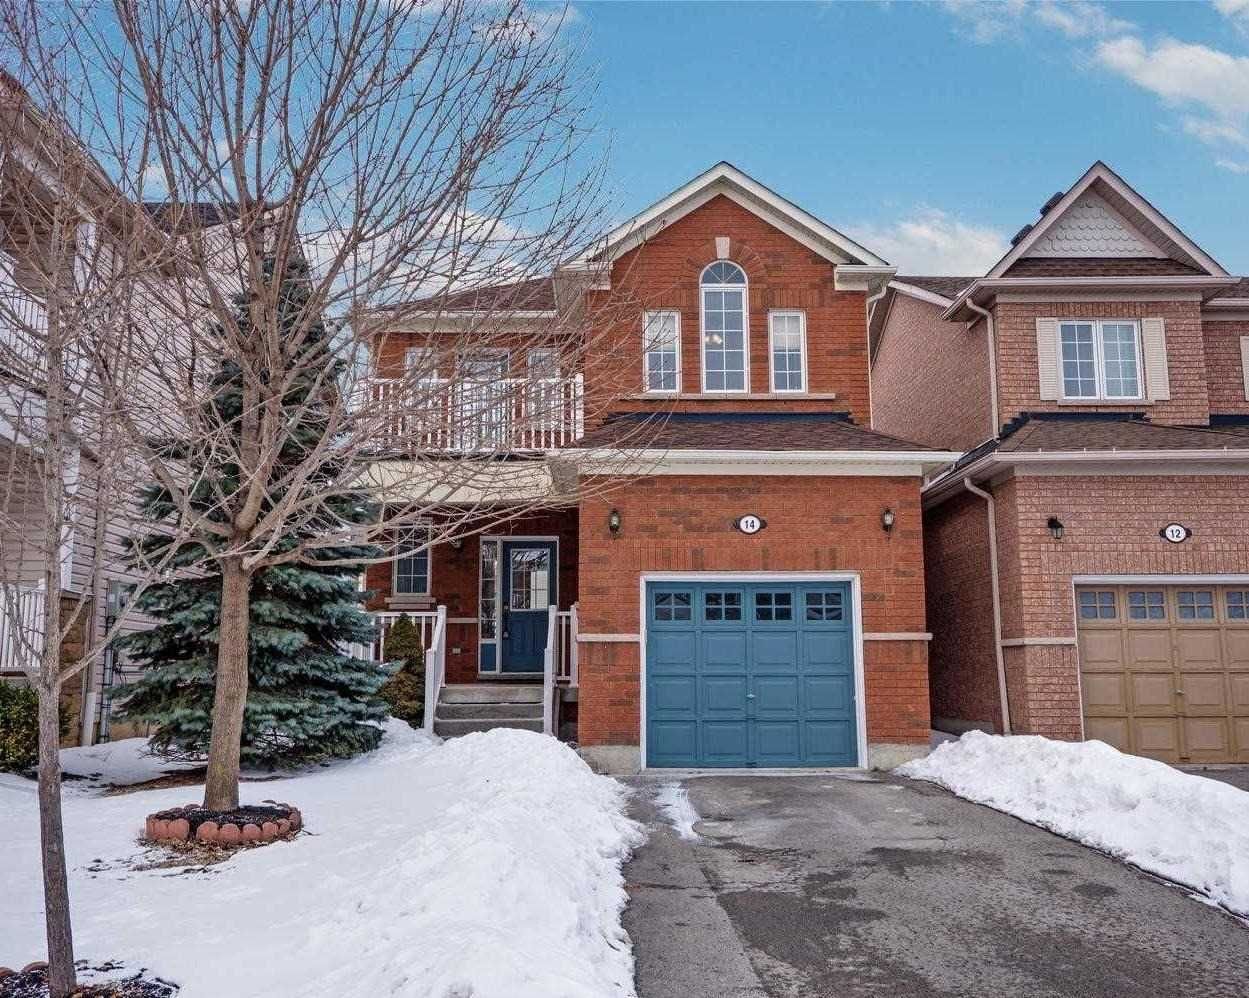 Open House. Open House on Sunday, March 10, 2019 2:00 PM - 4:00 PM